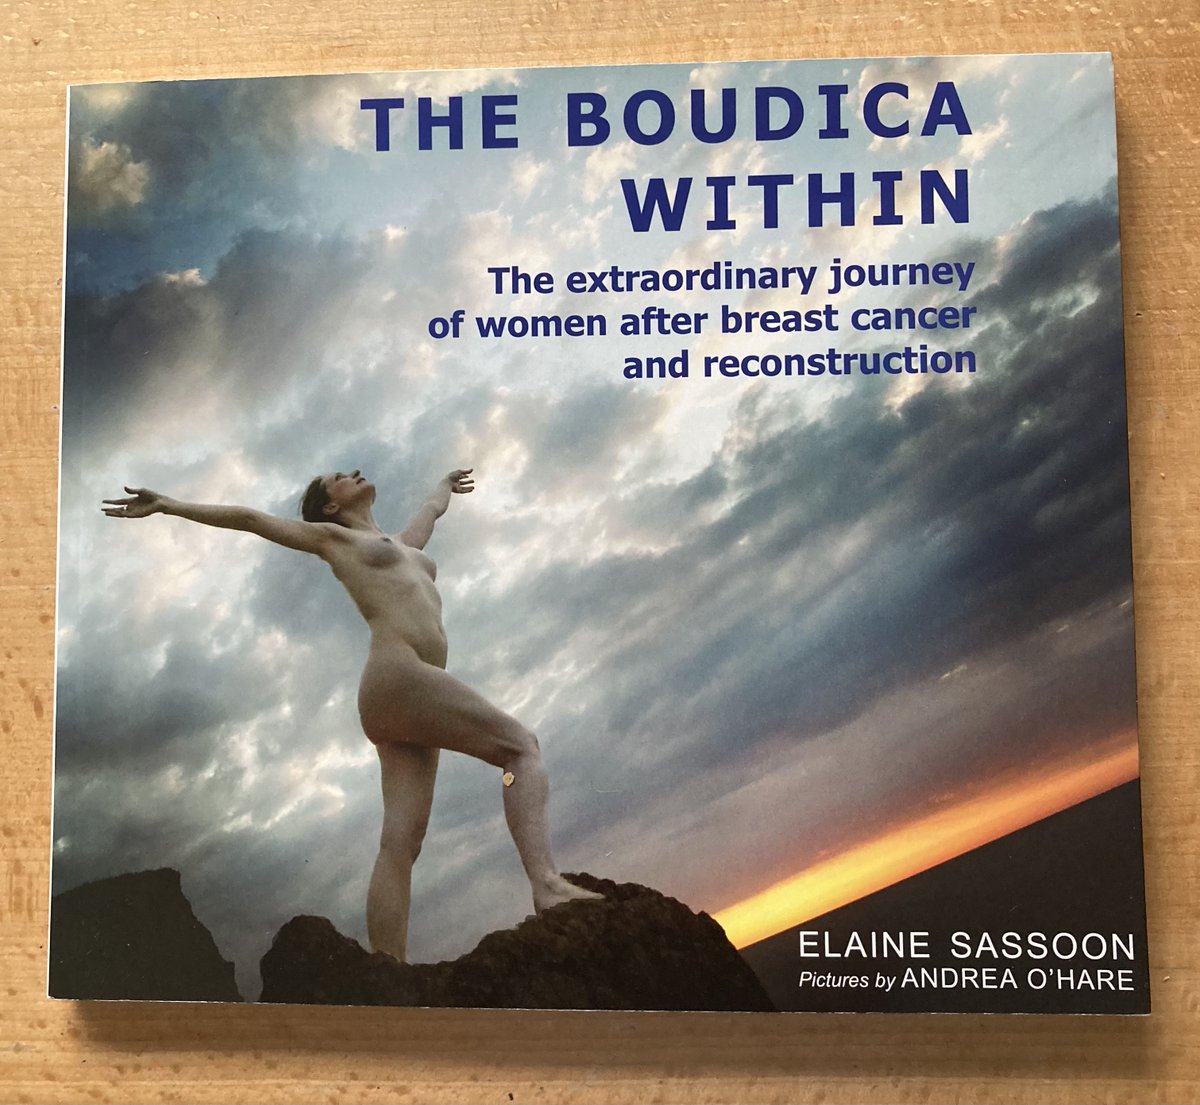 We're proud to support #breastreconstruction patients in many different ways from face-to-face Support Groups to conversations with our volunteers, info packs & relevant books. 'Thanks so much for the Boudica book; I'm really grateful for you sending that to me and good reading.'